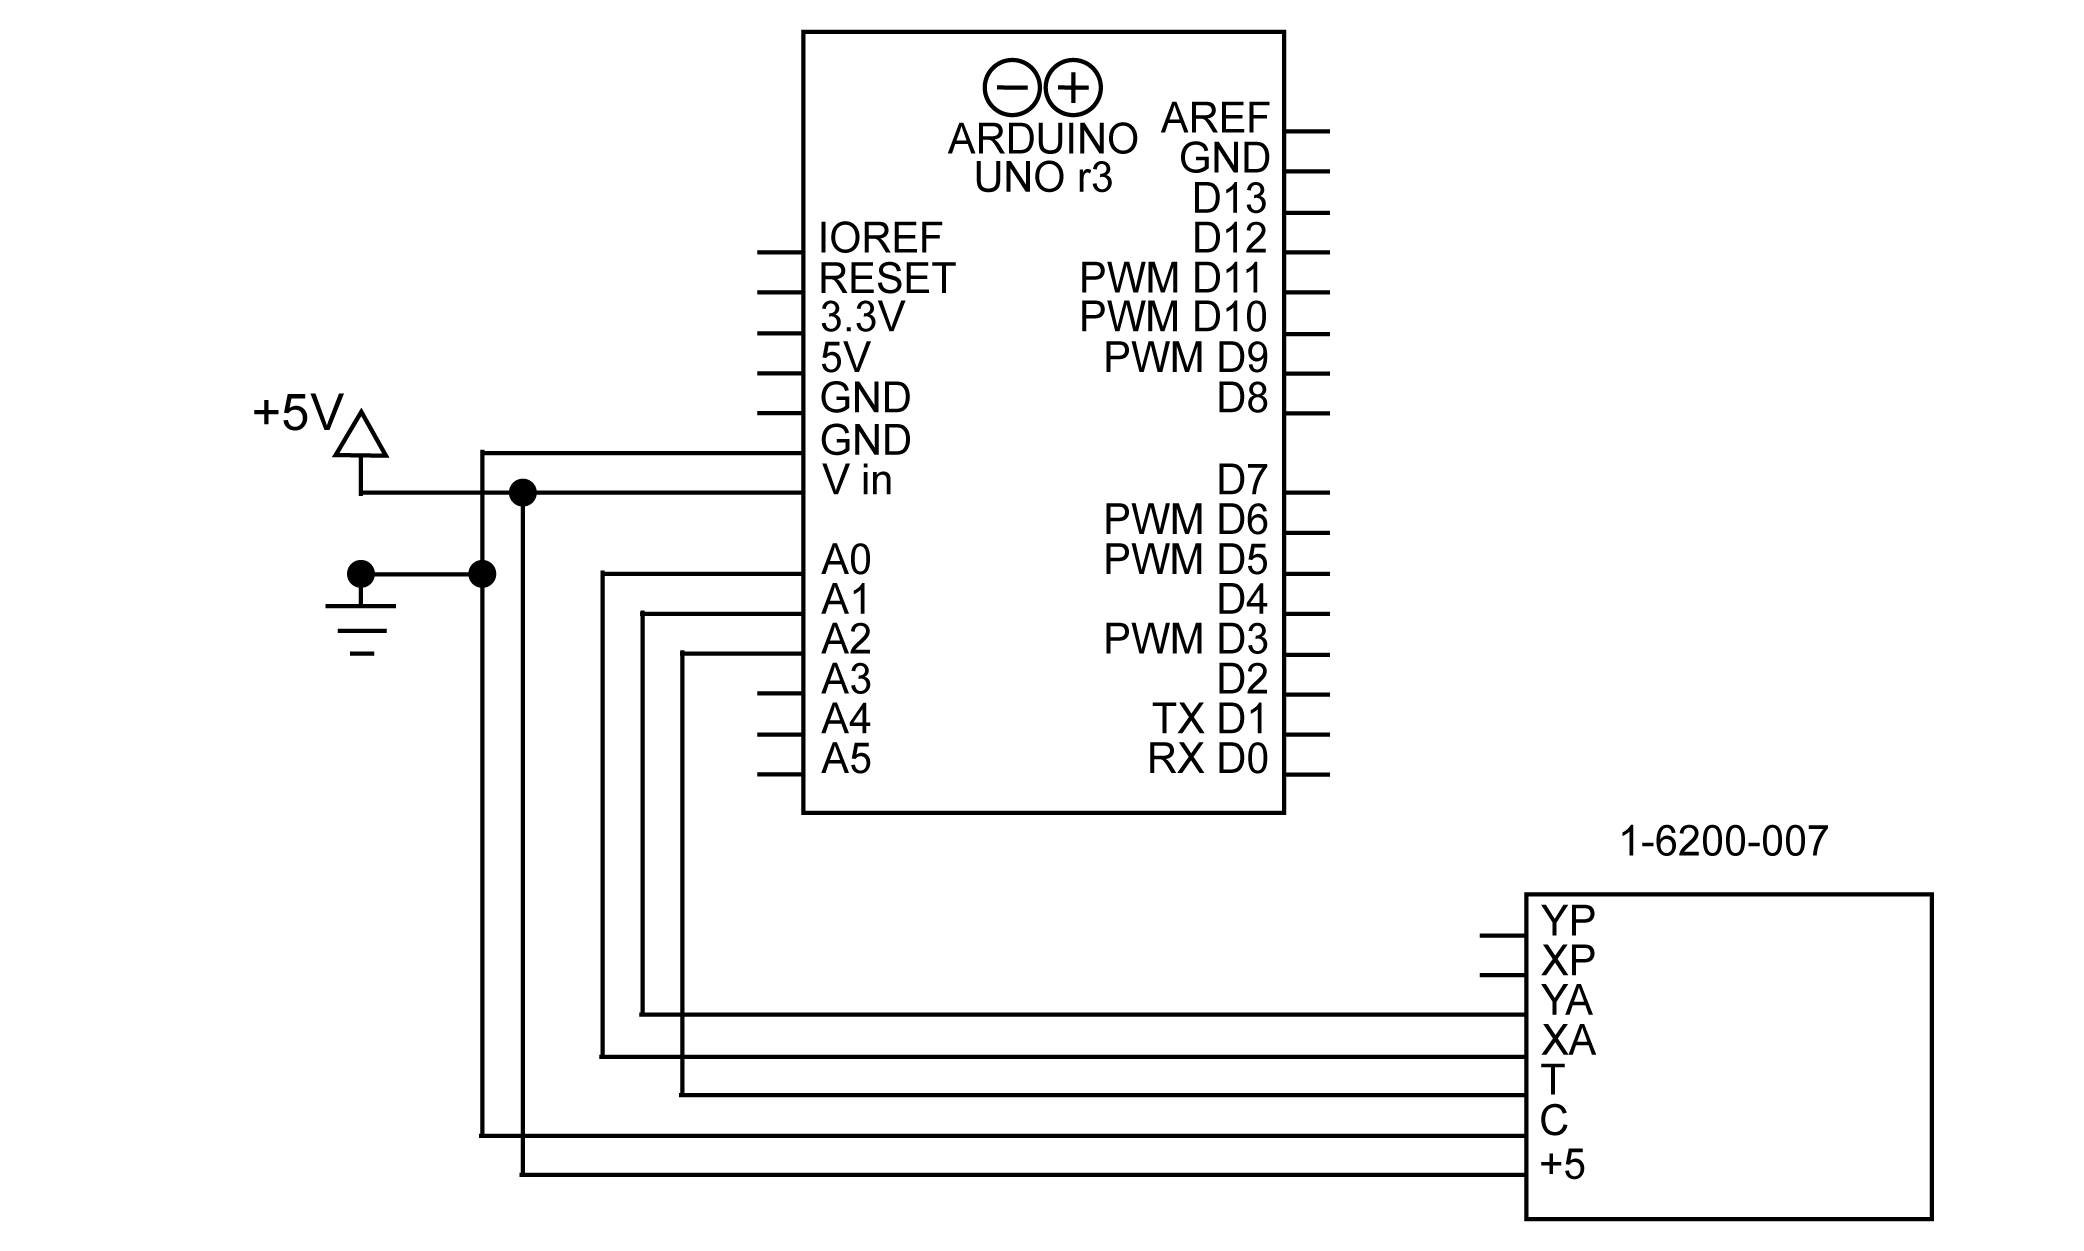 Wiring Schematic for the 1-6200-007 and 1-6200-012 analog signal conditioners with an Arduino Uno